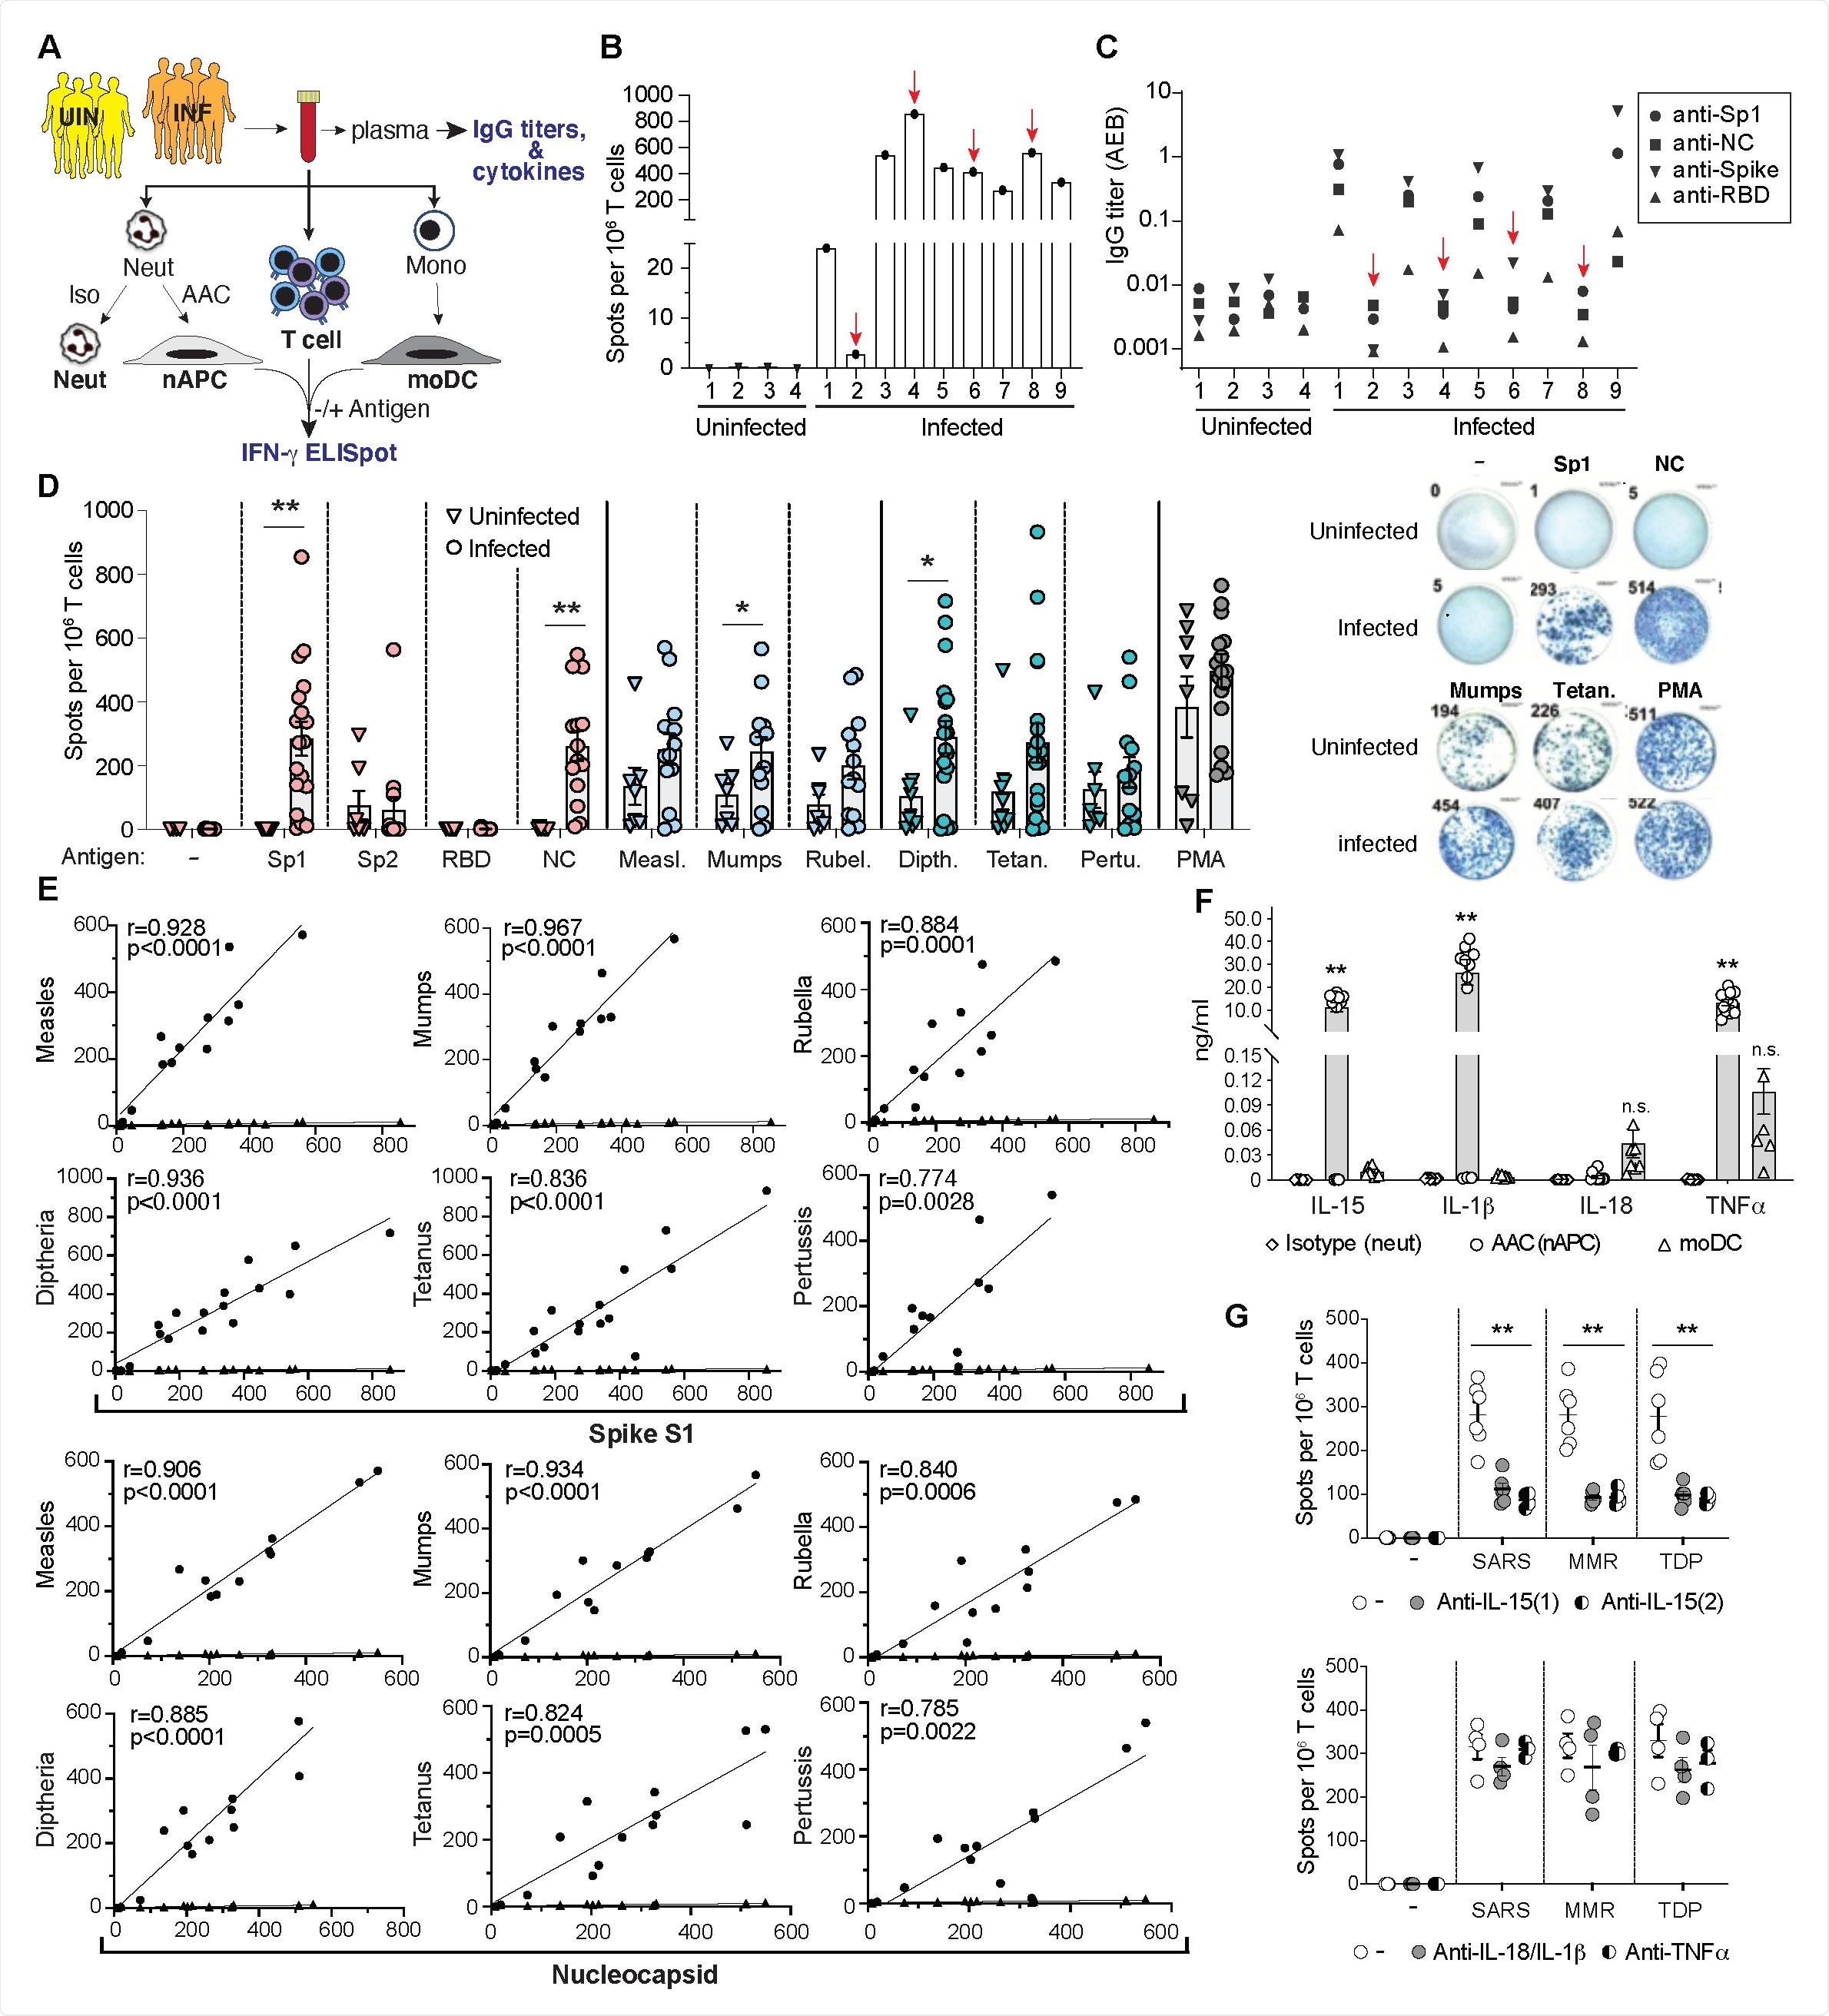 T cell responses to SARS-CoV-2, MMR and Tdap antigens in SARS-CoV-2 infected and uninfected donors